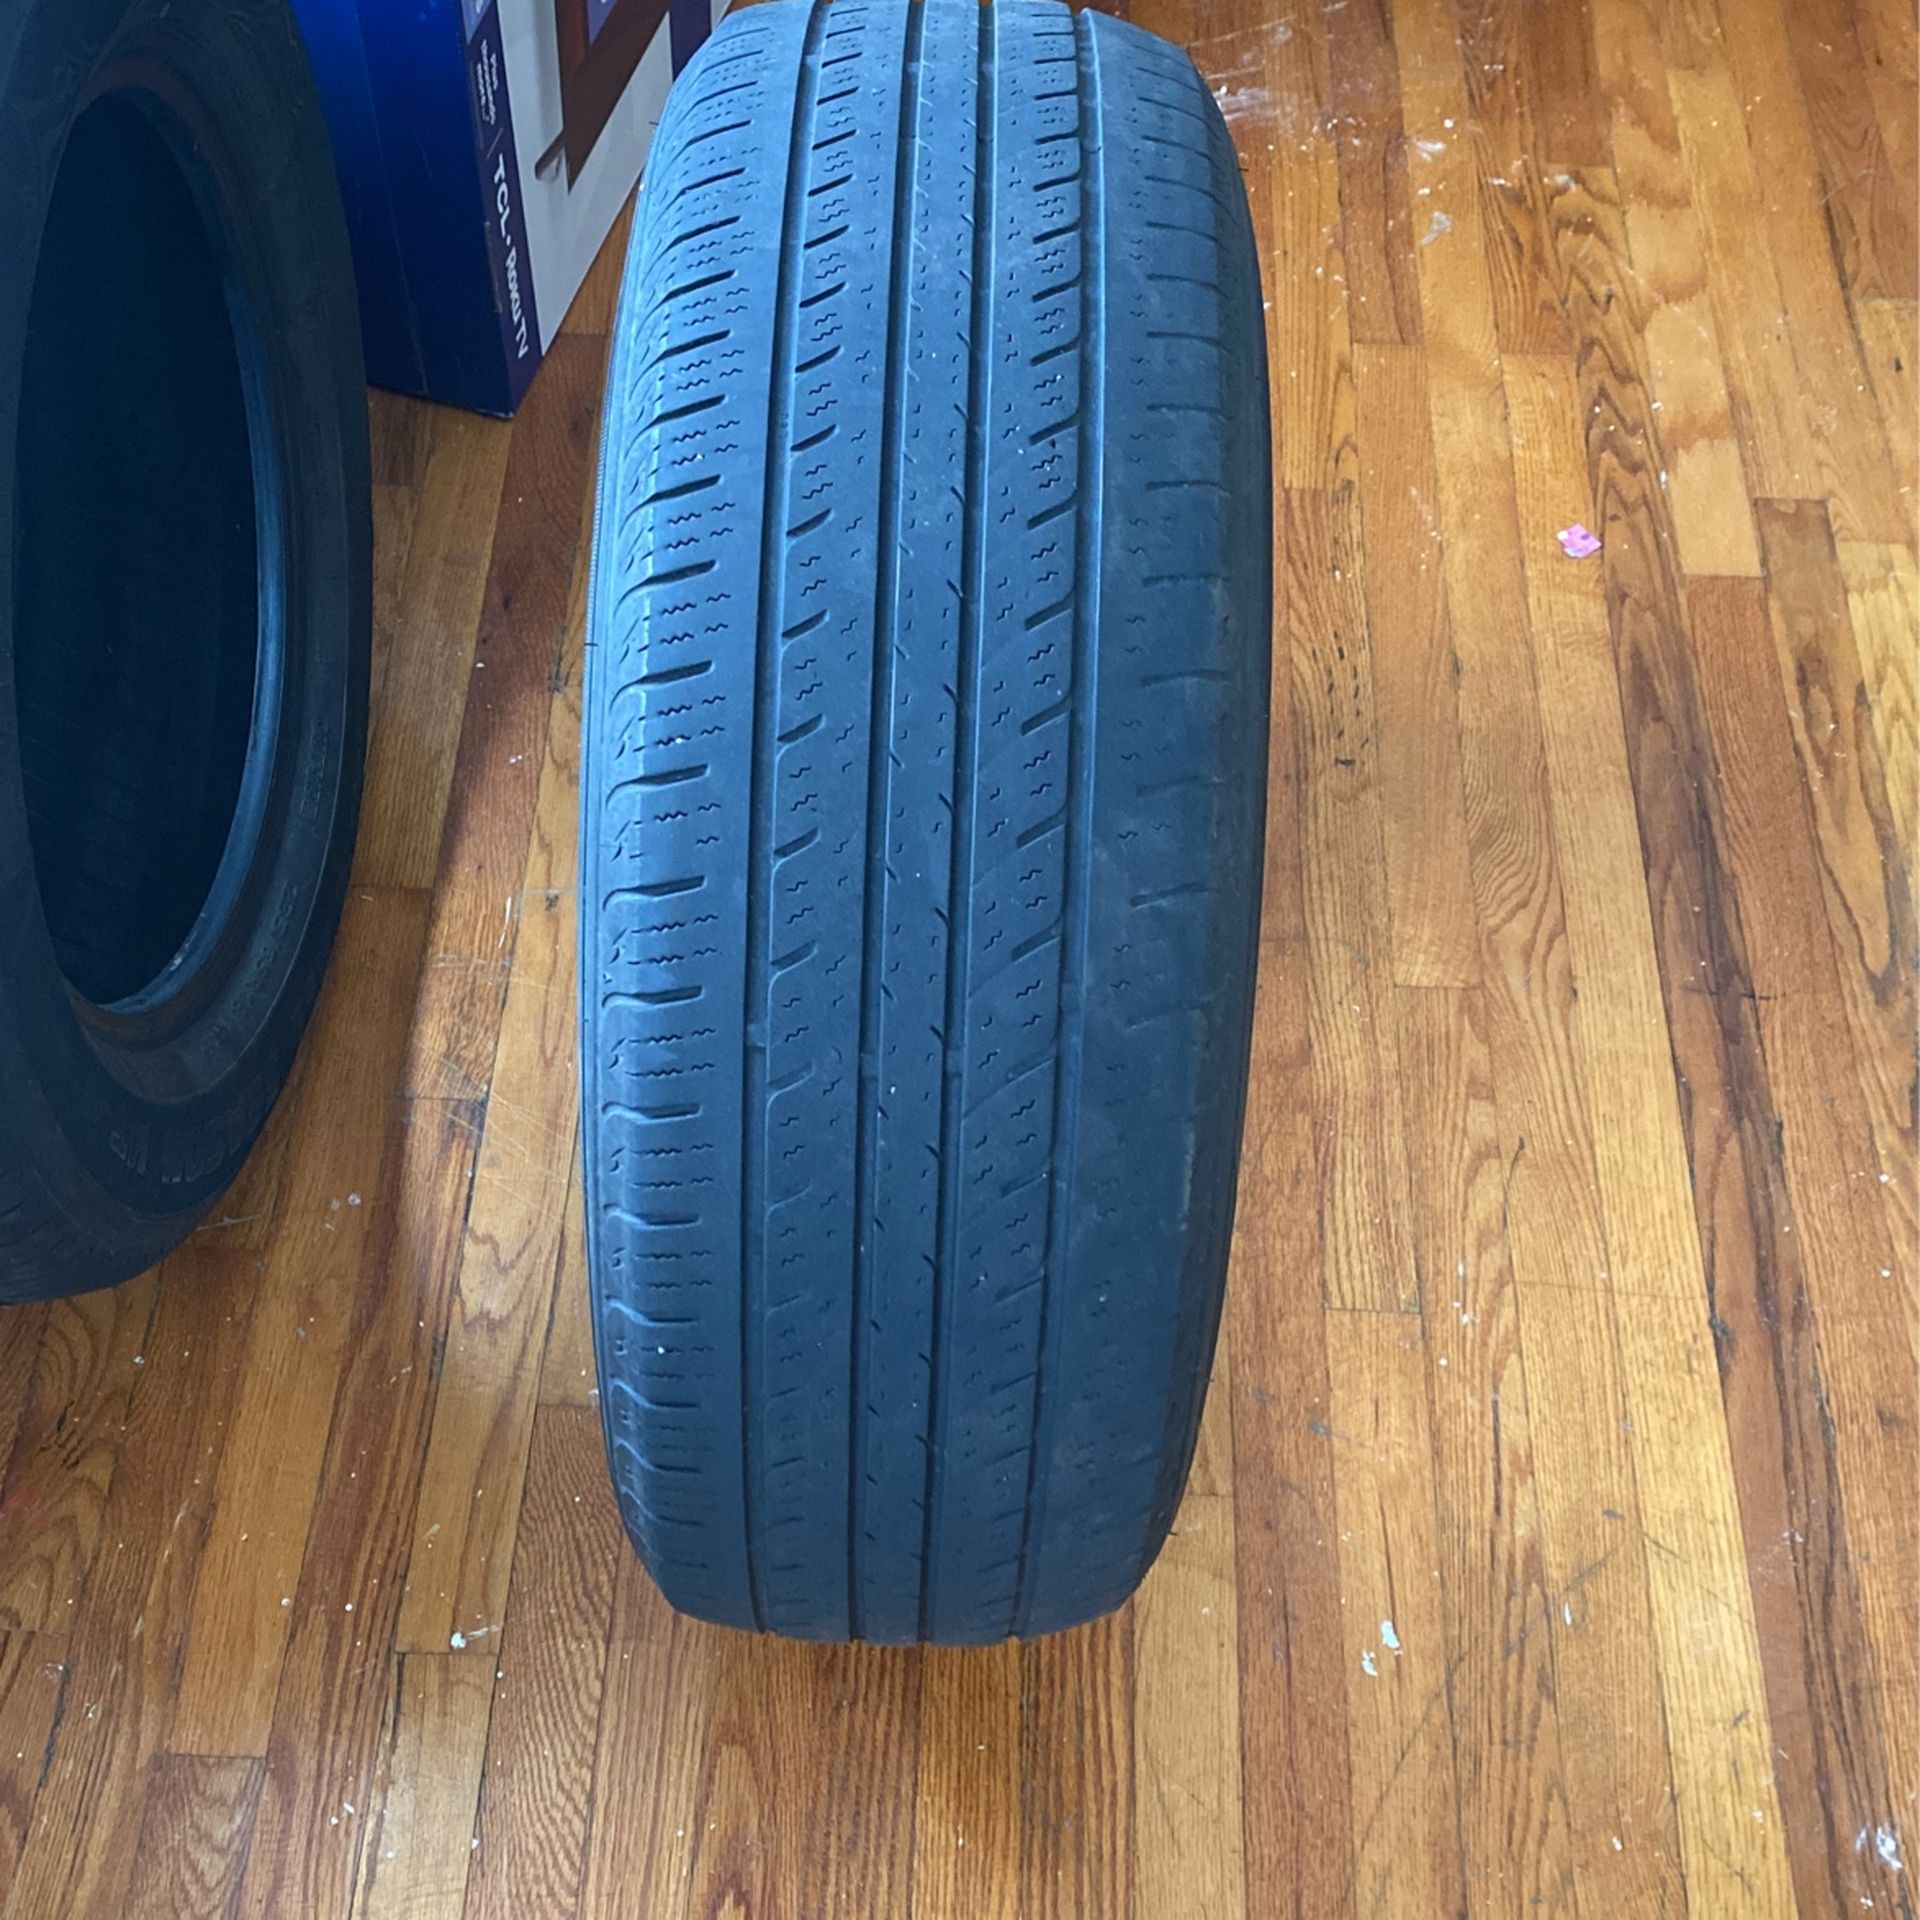 New Tires 235/65R18 FOR CHEAP $20 Each 